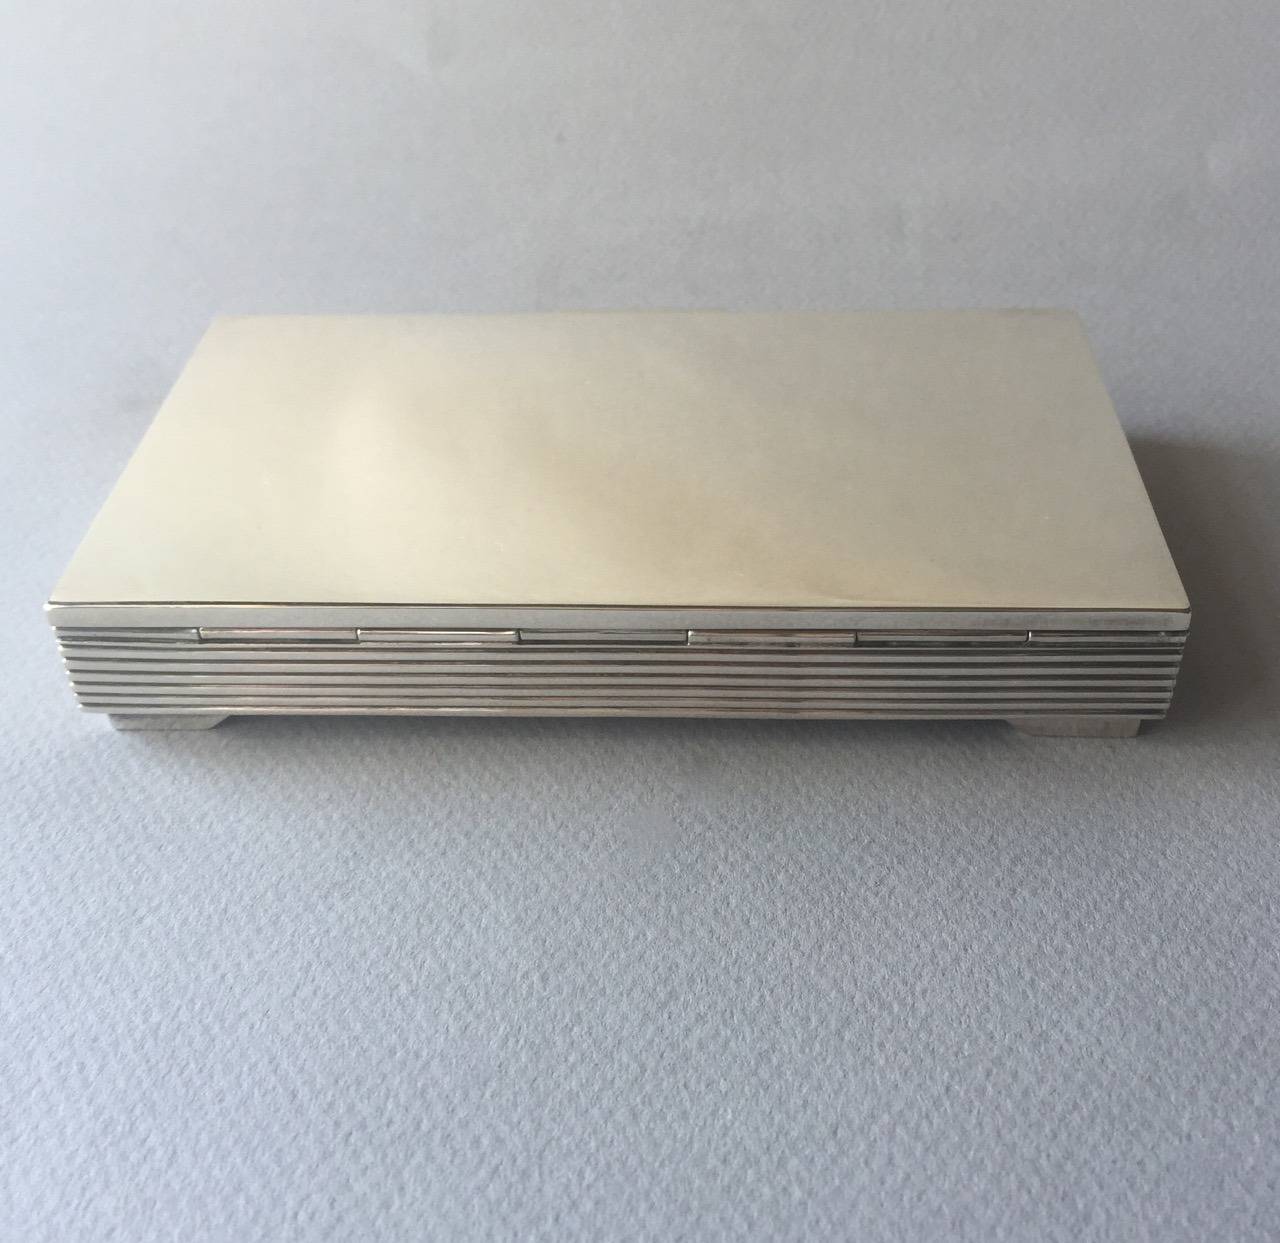 Georg Jensen box, no. 712 by Sigvard Bernadotte. Sleek, machine-age period.  Heavy gauge sterling silver, impressive weight and hand made.  Perfect gift. Hand-engraving available. ( Inside of lid is suggested) 

Sigvard Bernadotte (1907 - 2002)